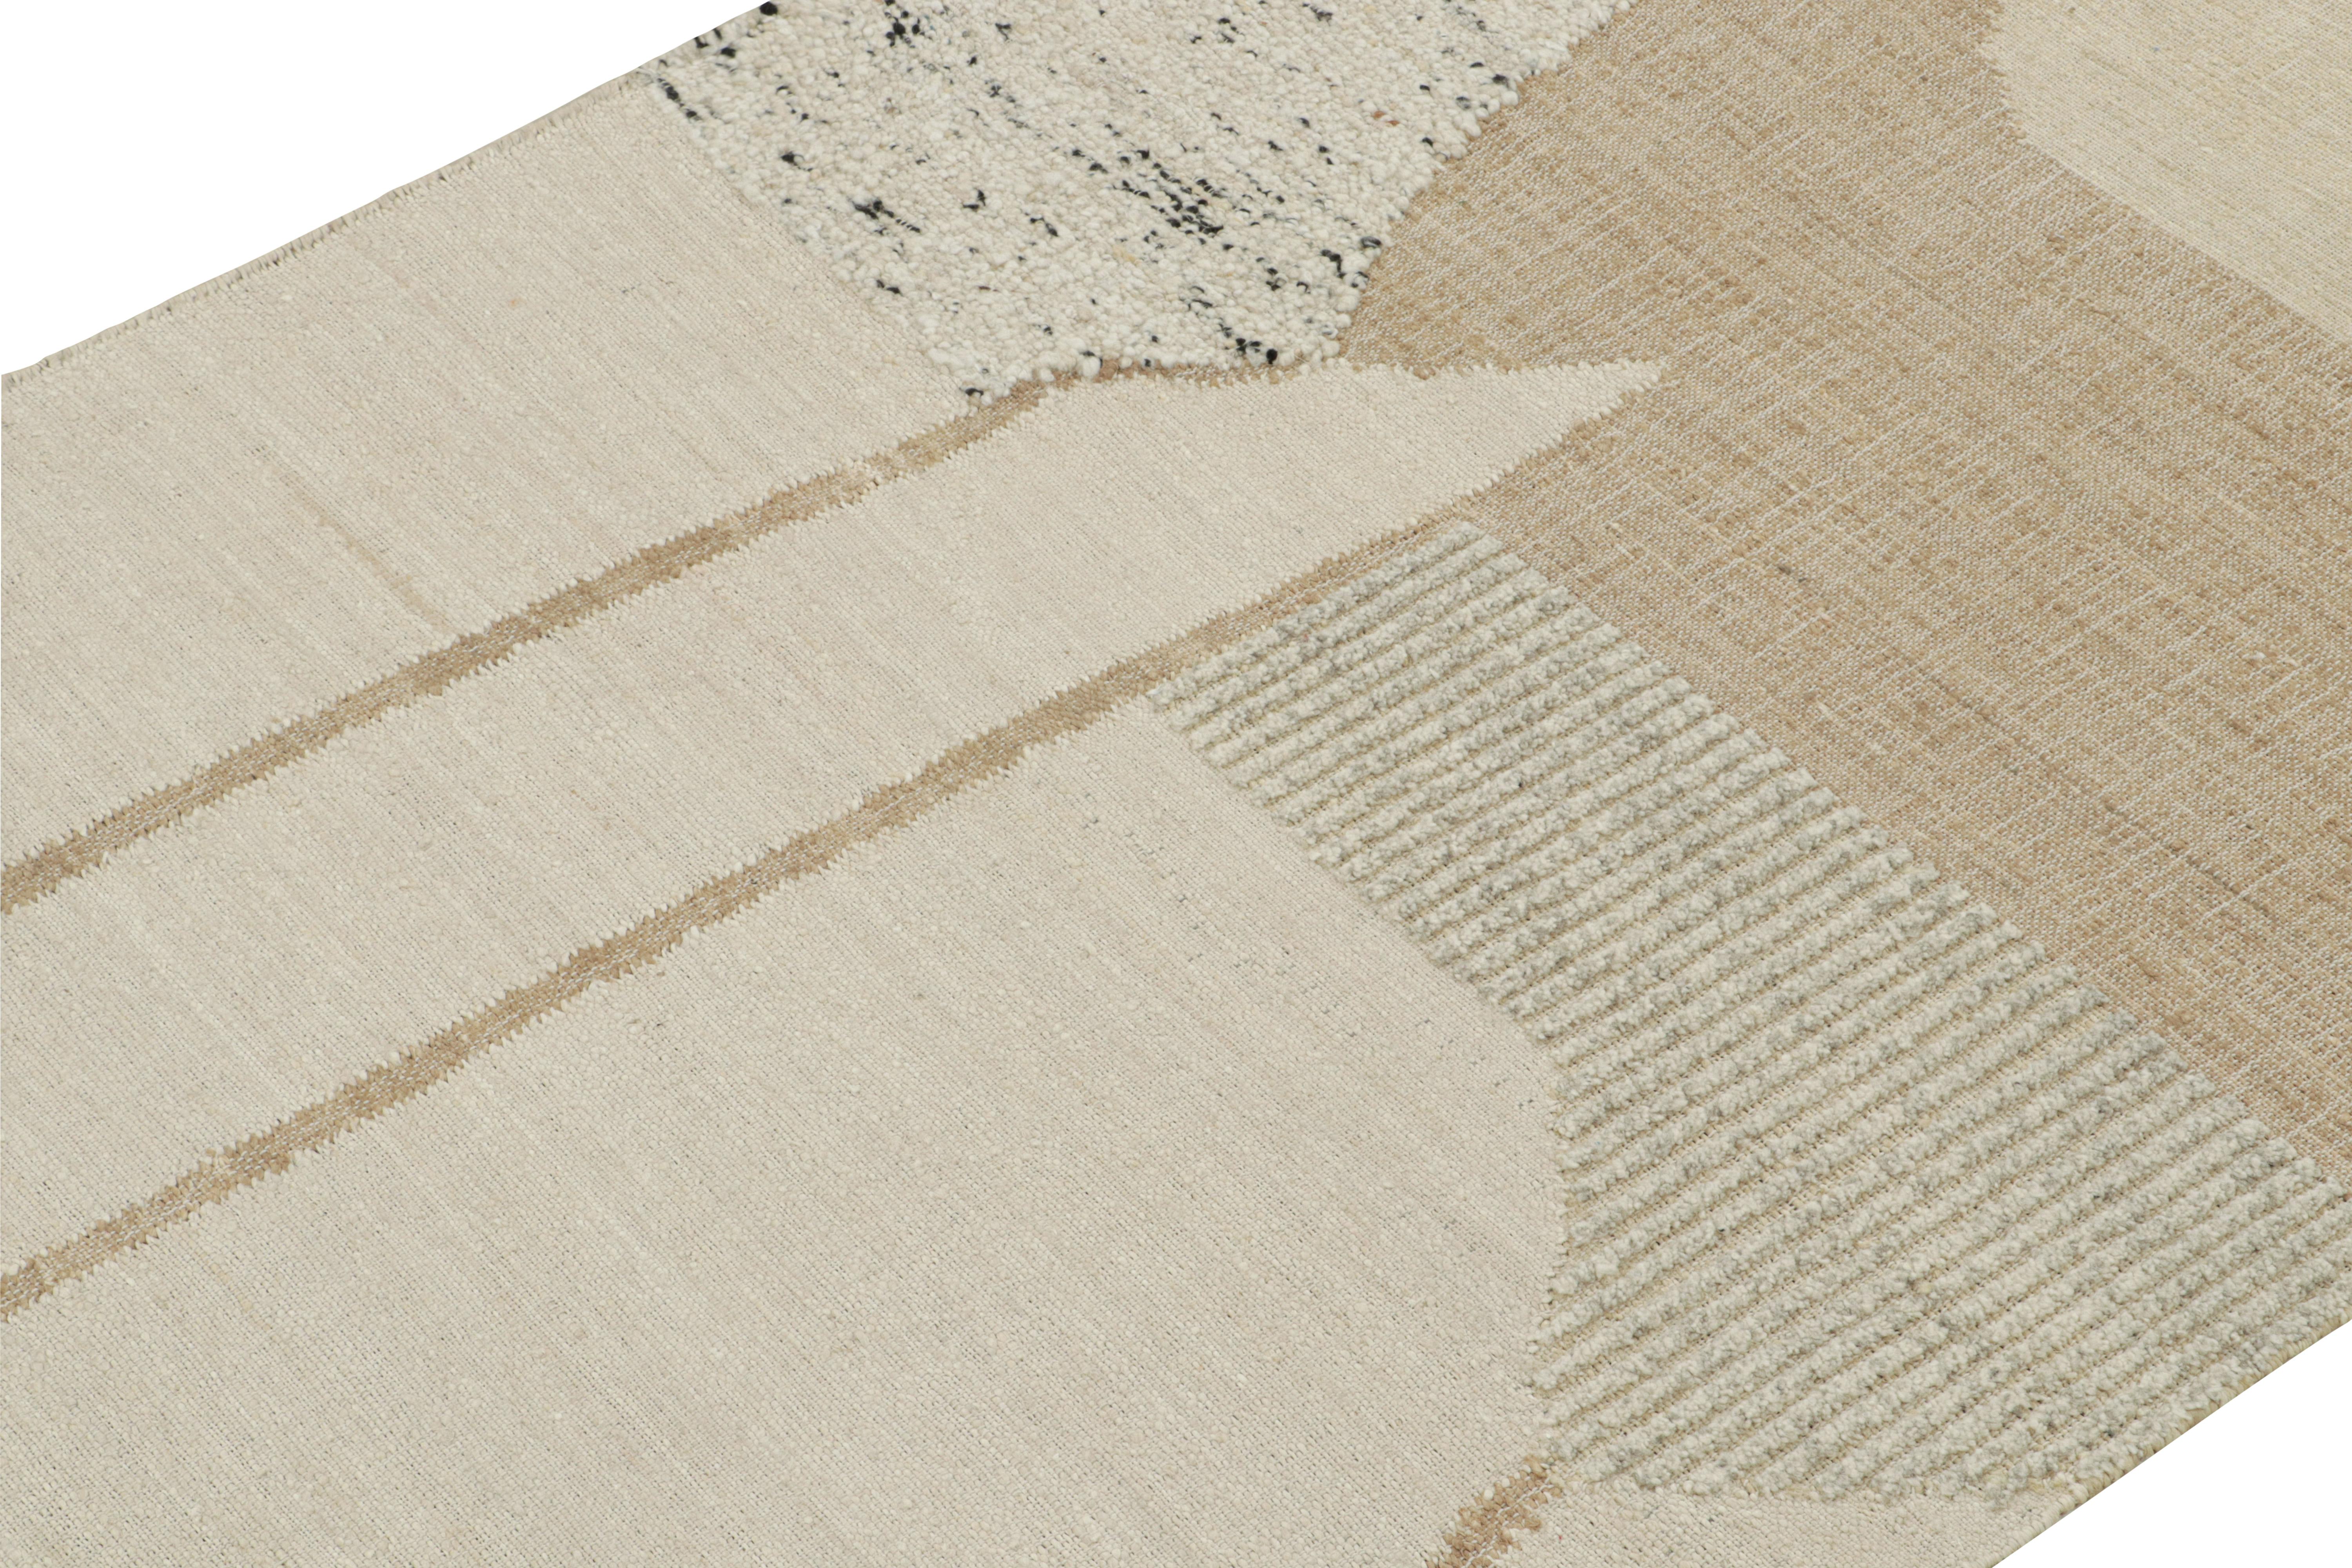 Handwoven in wool & jute, this 5x8 piece is a grand new entry to Rug & Kilim’s modern flatweave collection.

On the Design: 

The kilim rug carries an abstract design in brown, white & black. The aesthetics of the piece further enjoy a brilliant